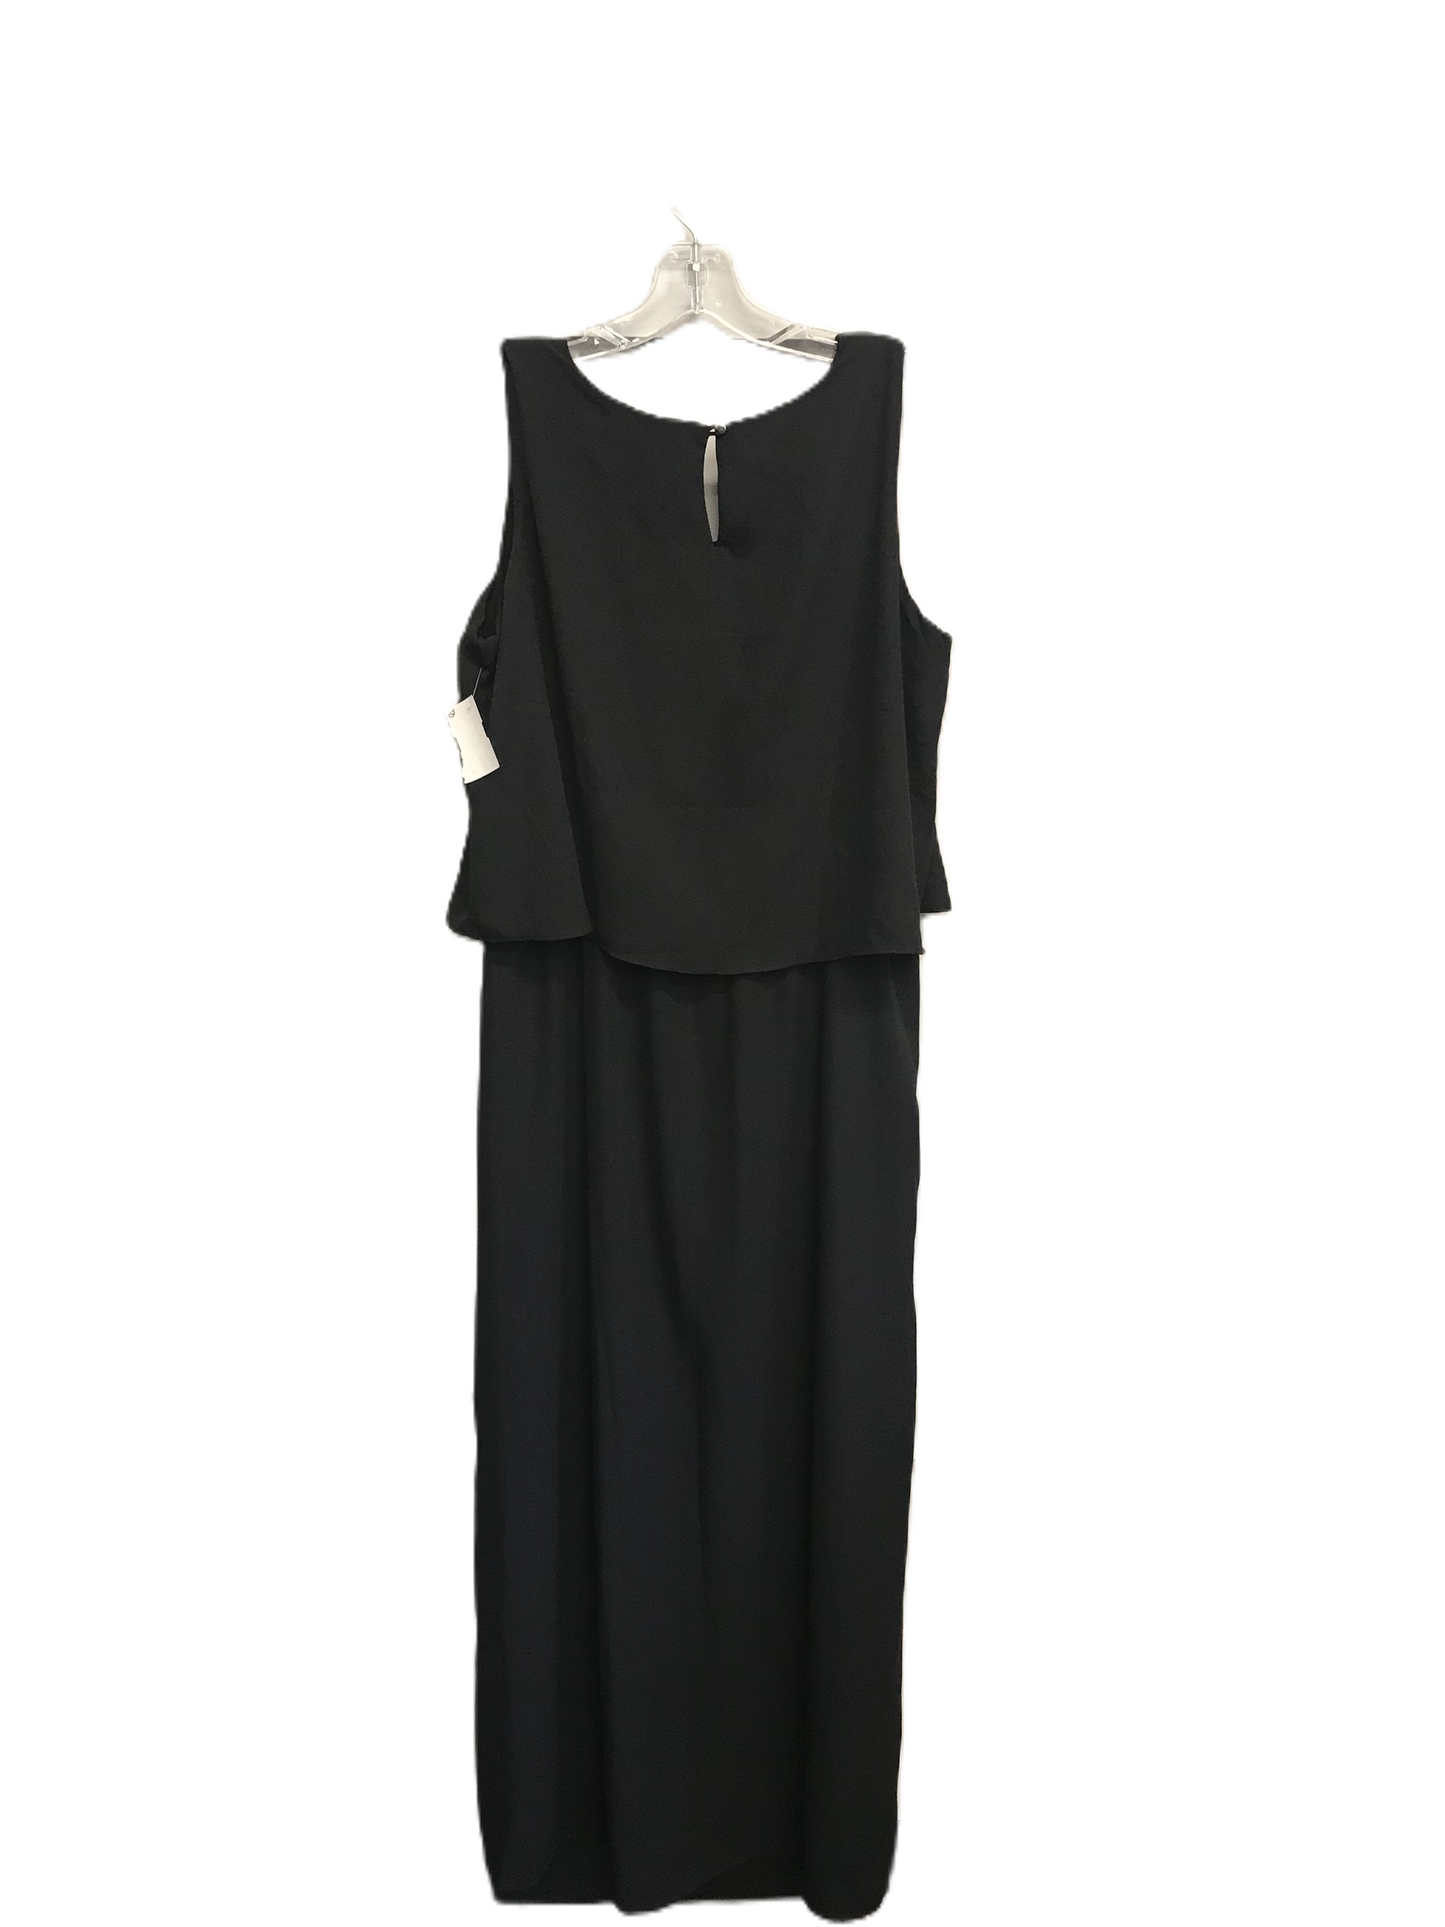 Black Dress Party Long By Ny Collection, Size: M